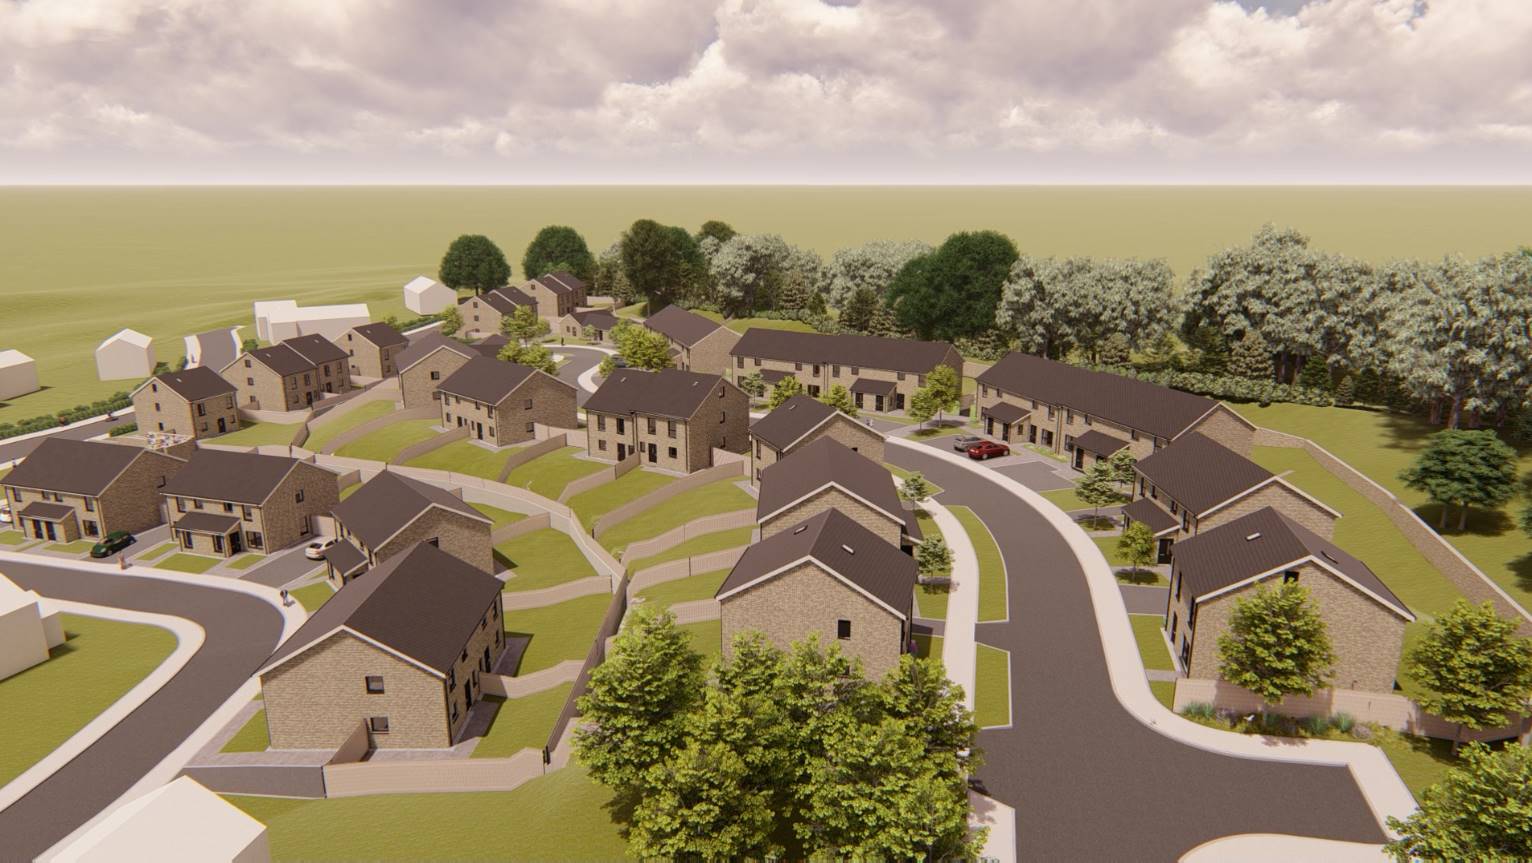 Plans for council homes at former Dumbarton school approved